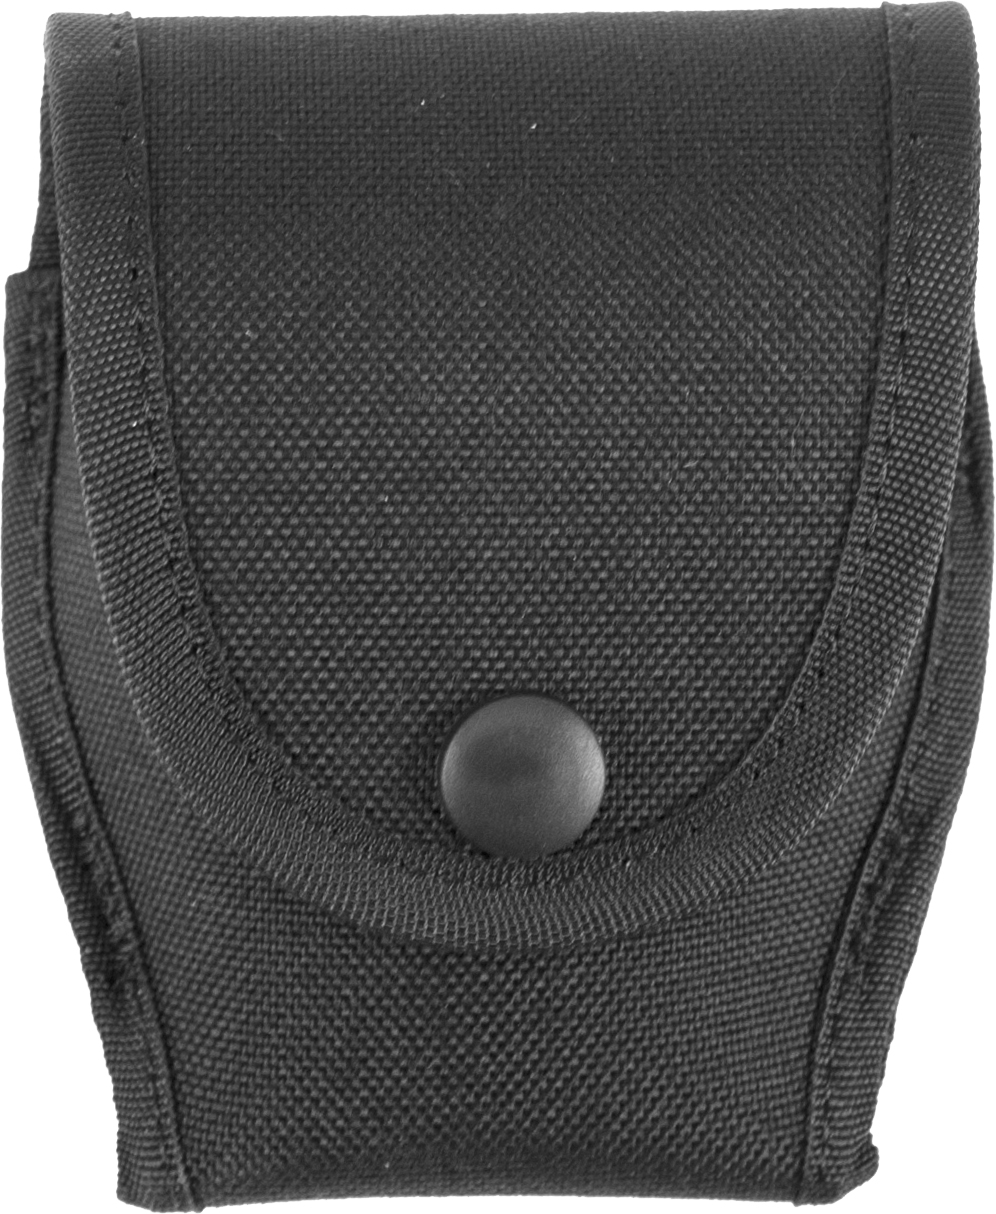 88781 NEW Uncle Mike's Black Single Duty Handcuff Case Police Corrections 